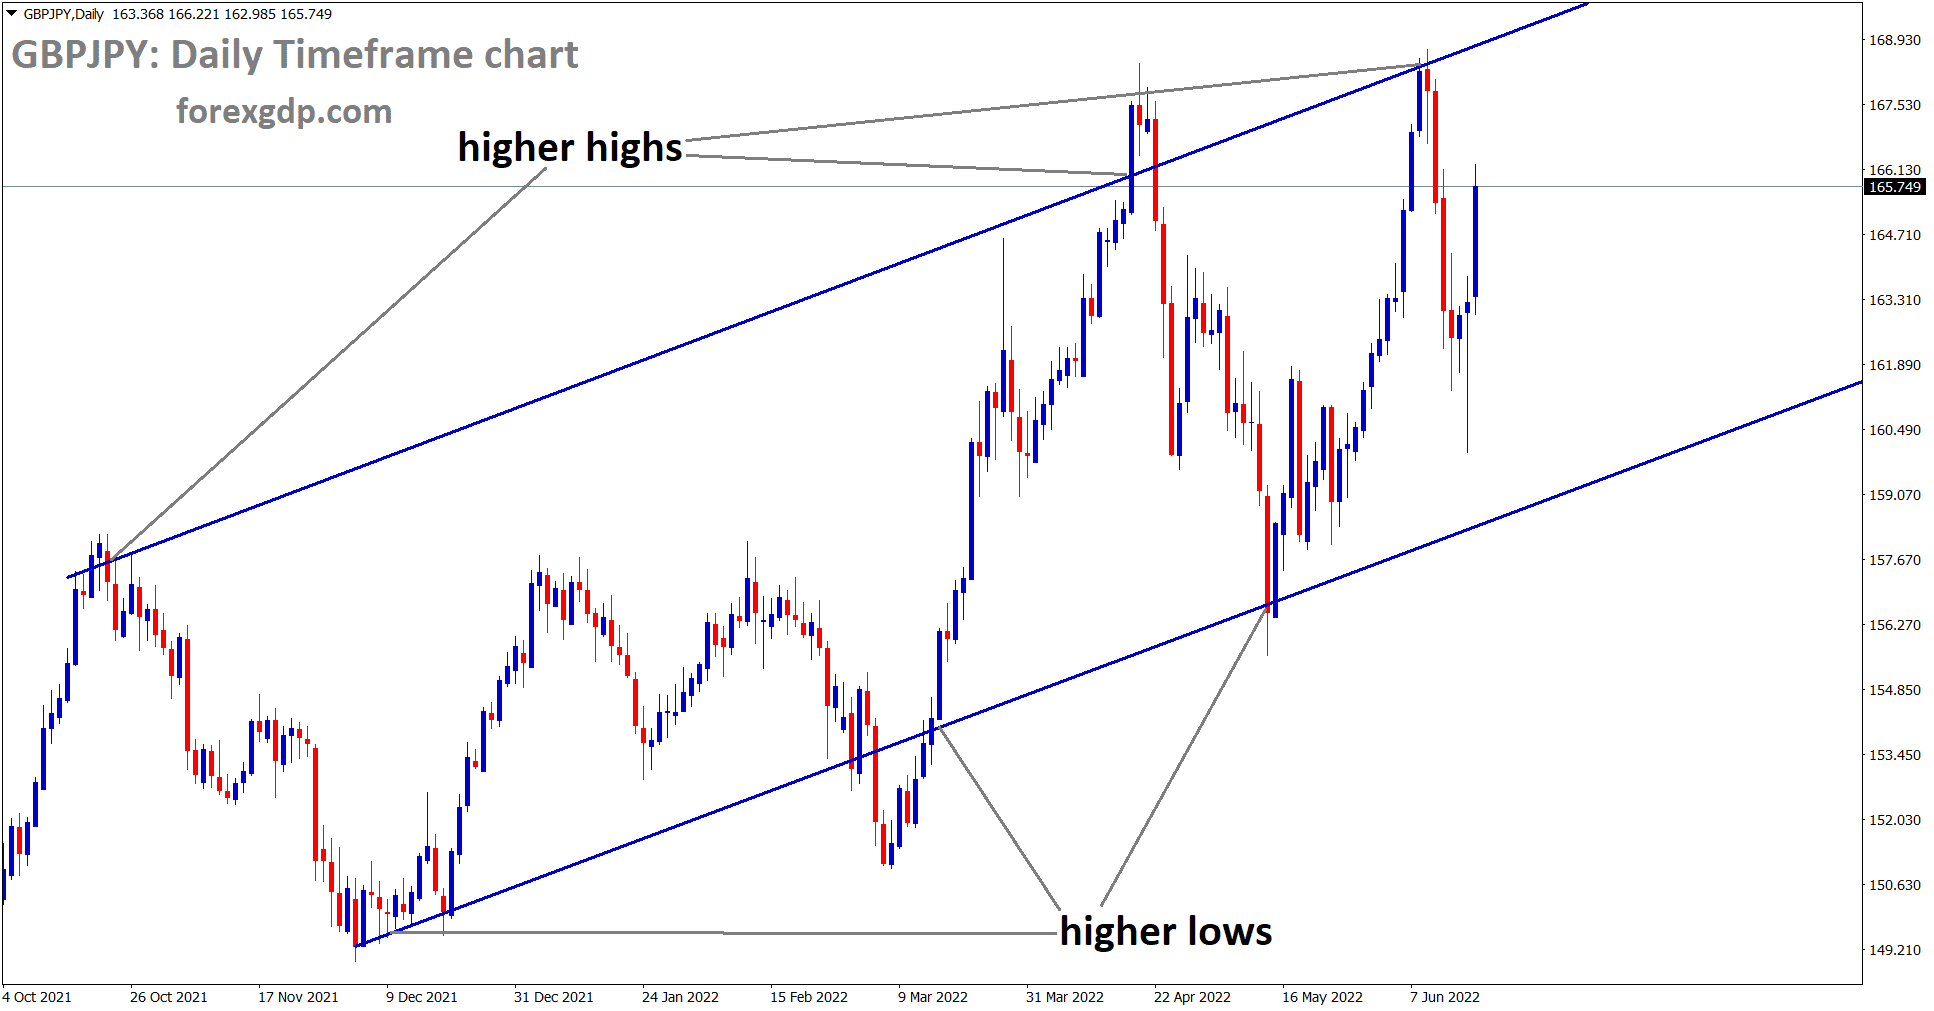 GBPJPY is moving in a ascending channel and the market has reached he higher high area of the channel